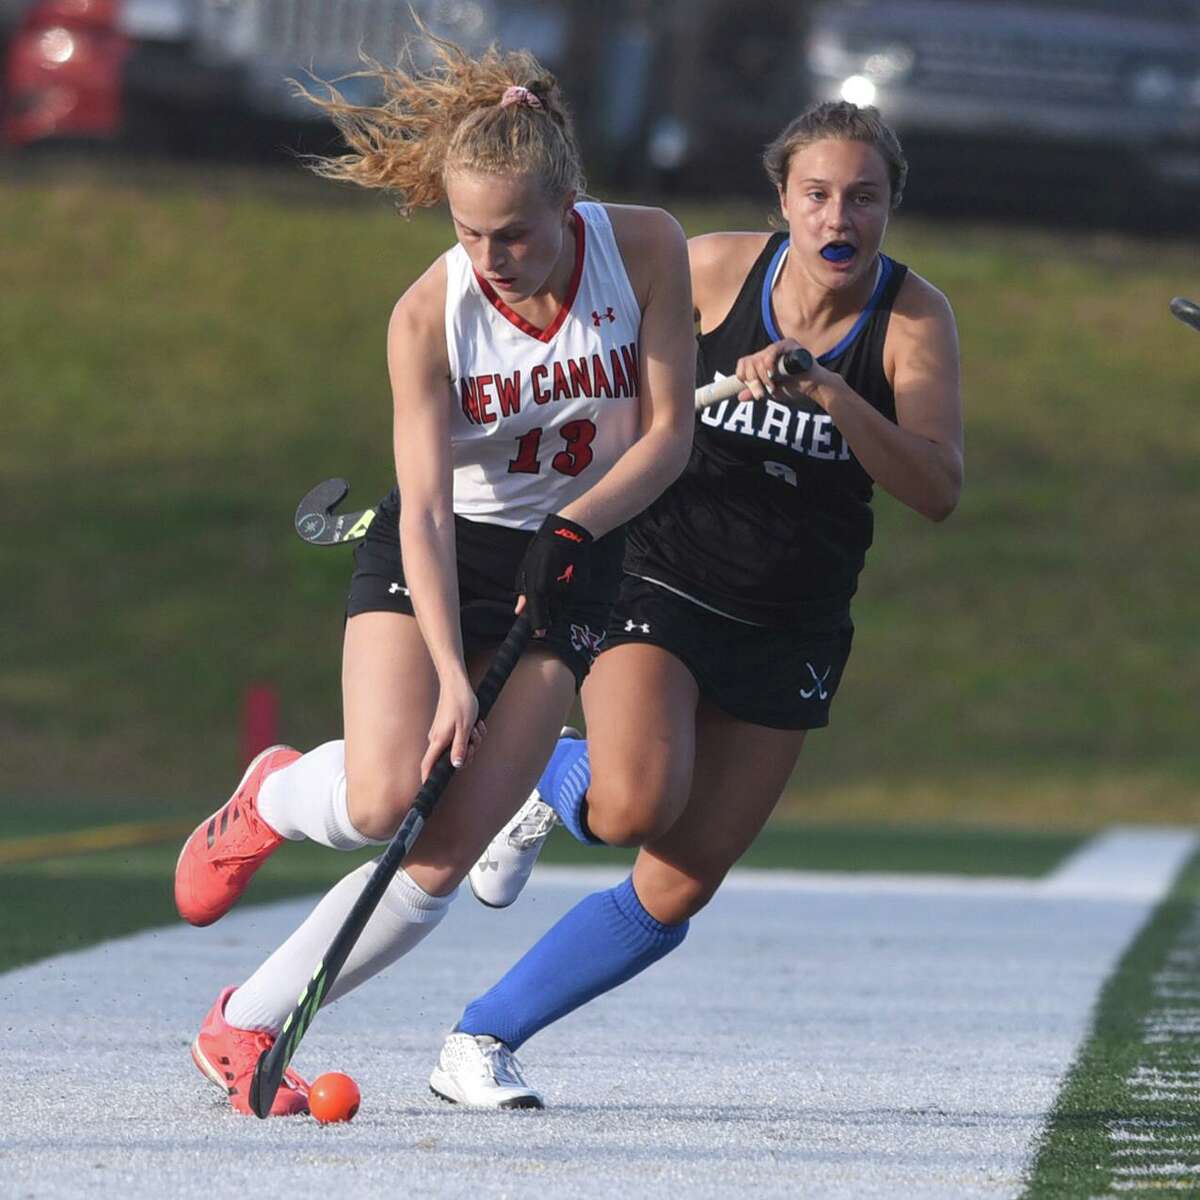 New Canaan’s Zoey Bennett (13) brings the ball up the sideline during the Rams’ field hockey game against Darien at Dunning Field on Oct. 19, 2020.